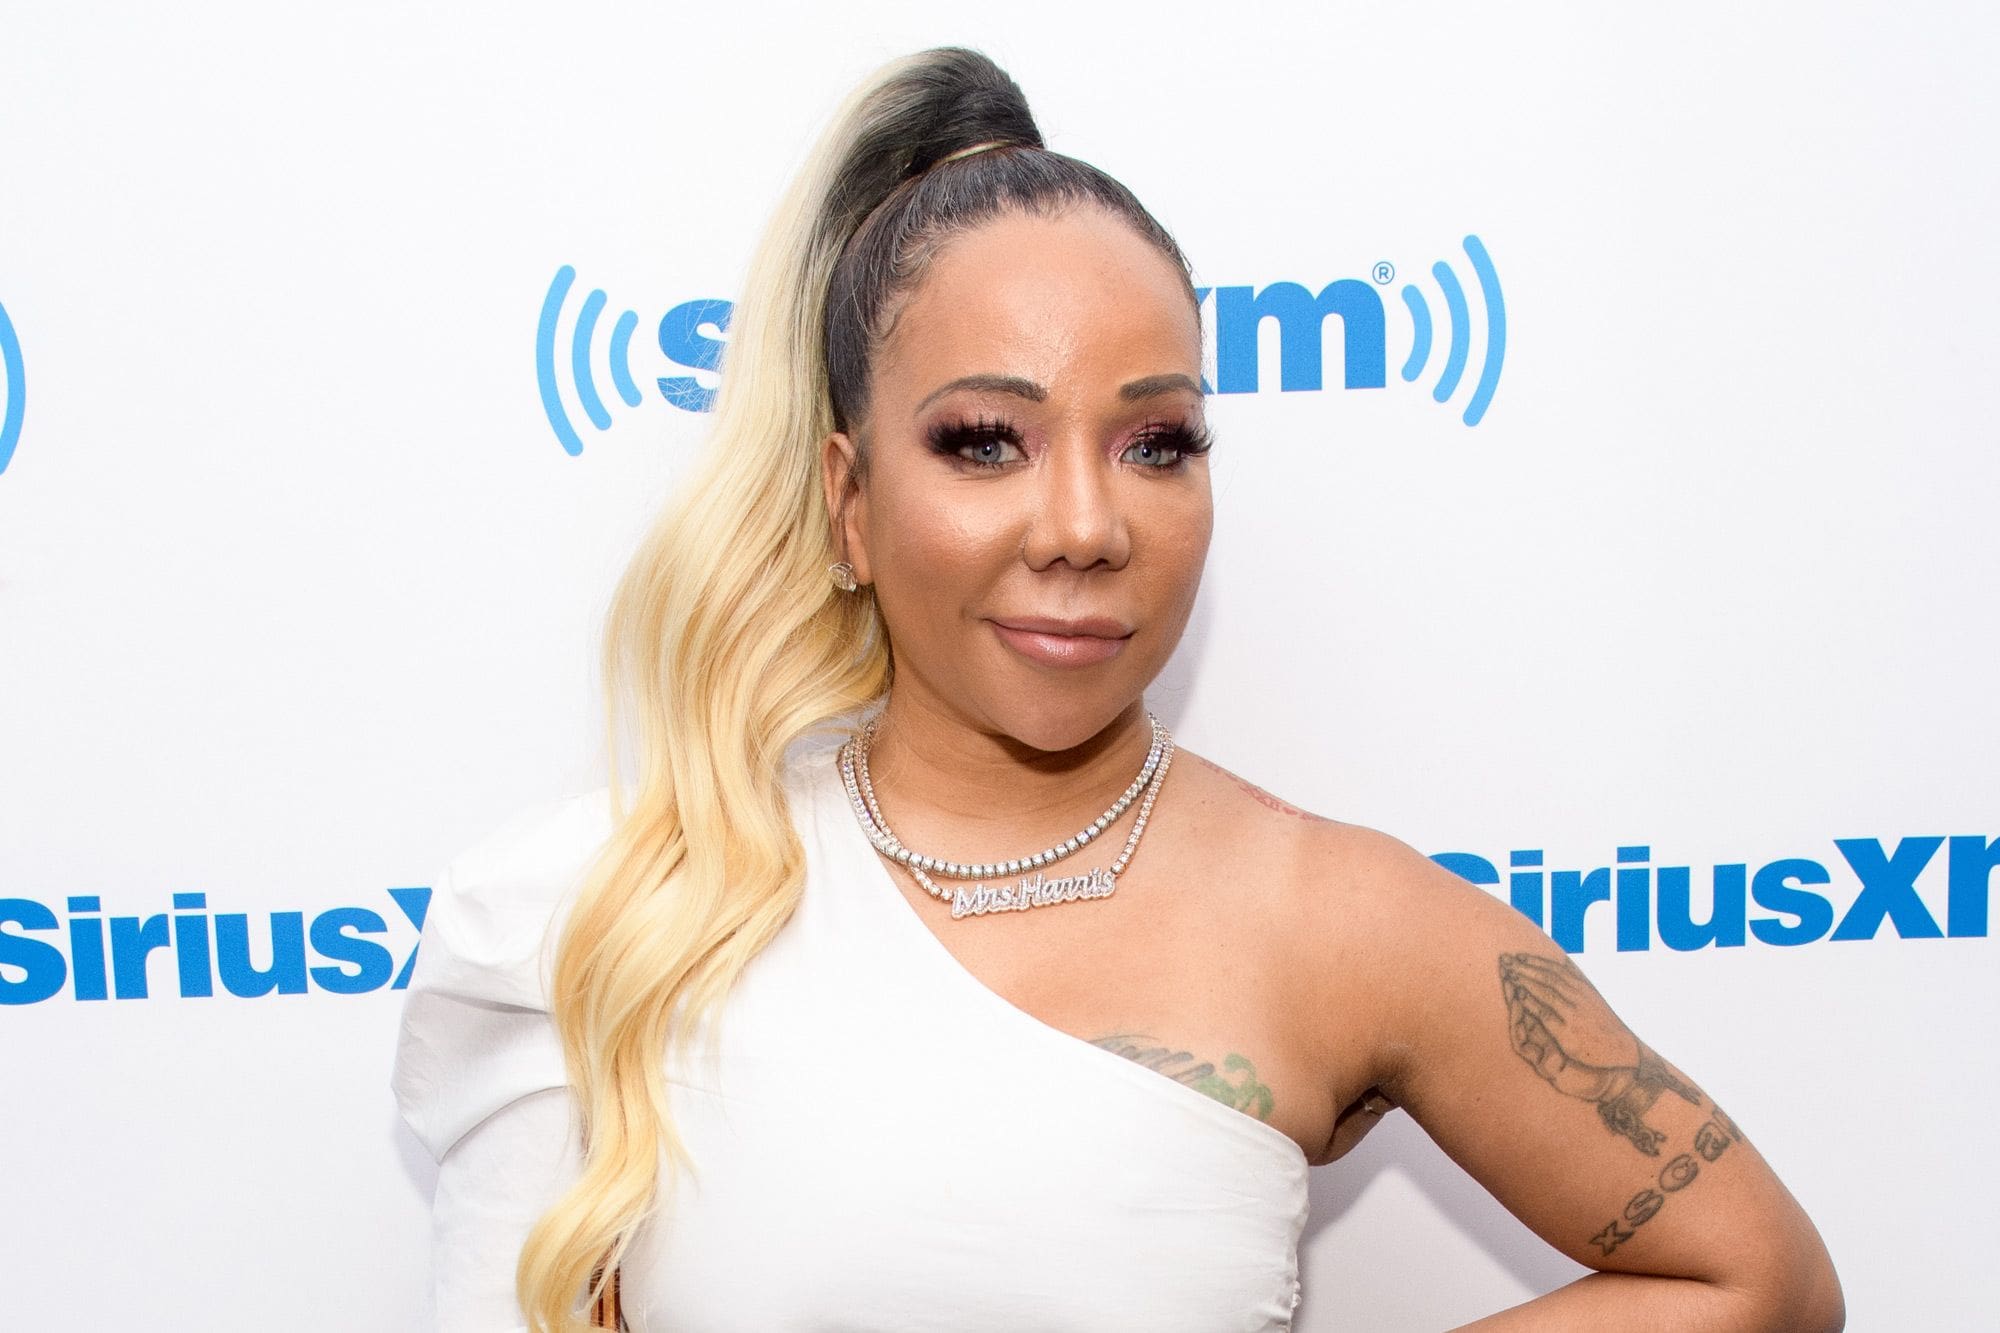 tiny-harris-celebrates-her-son-who-will-drop-his-album-on-august-25th